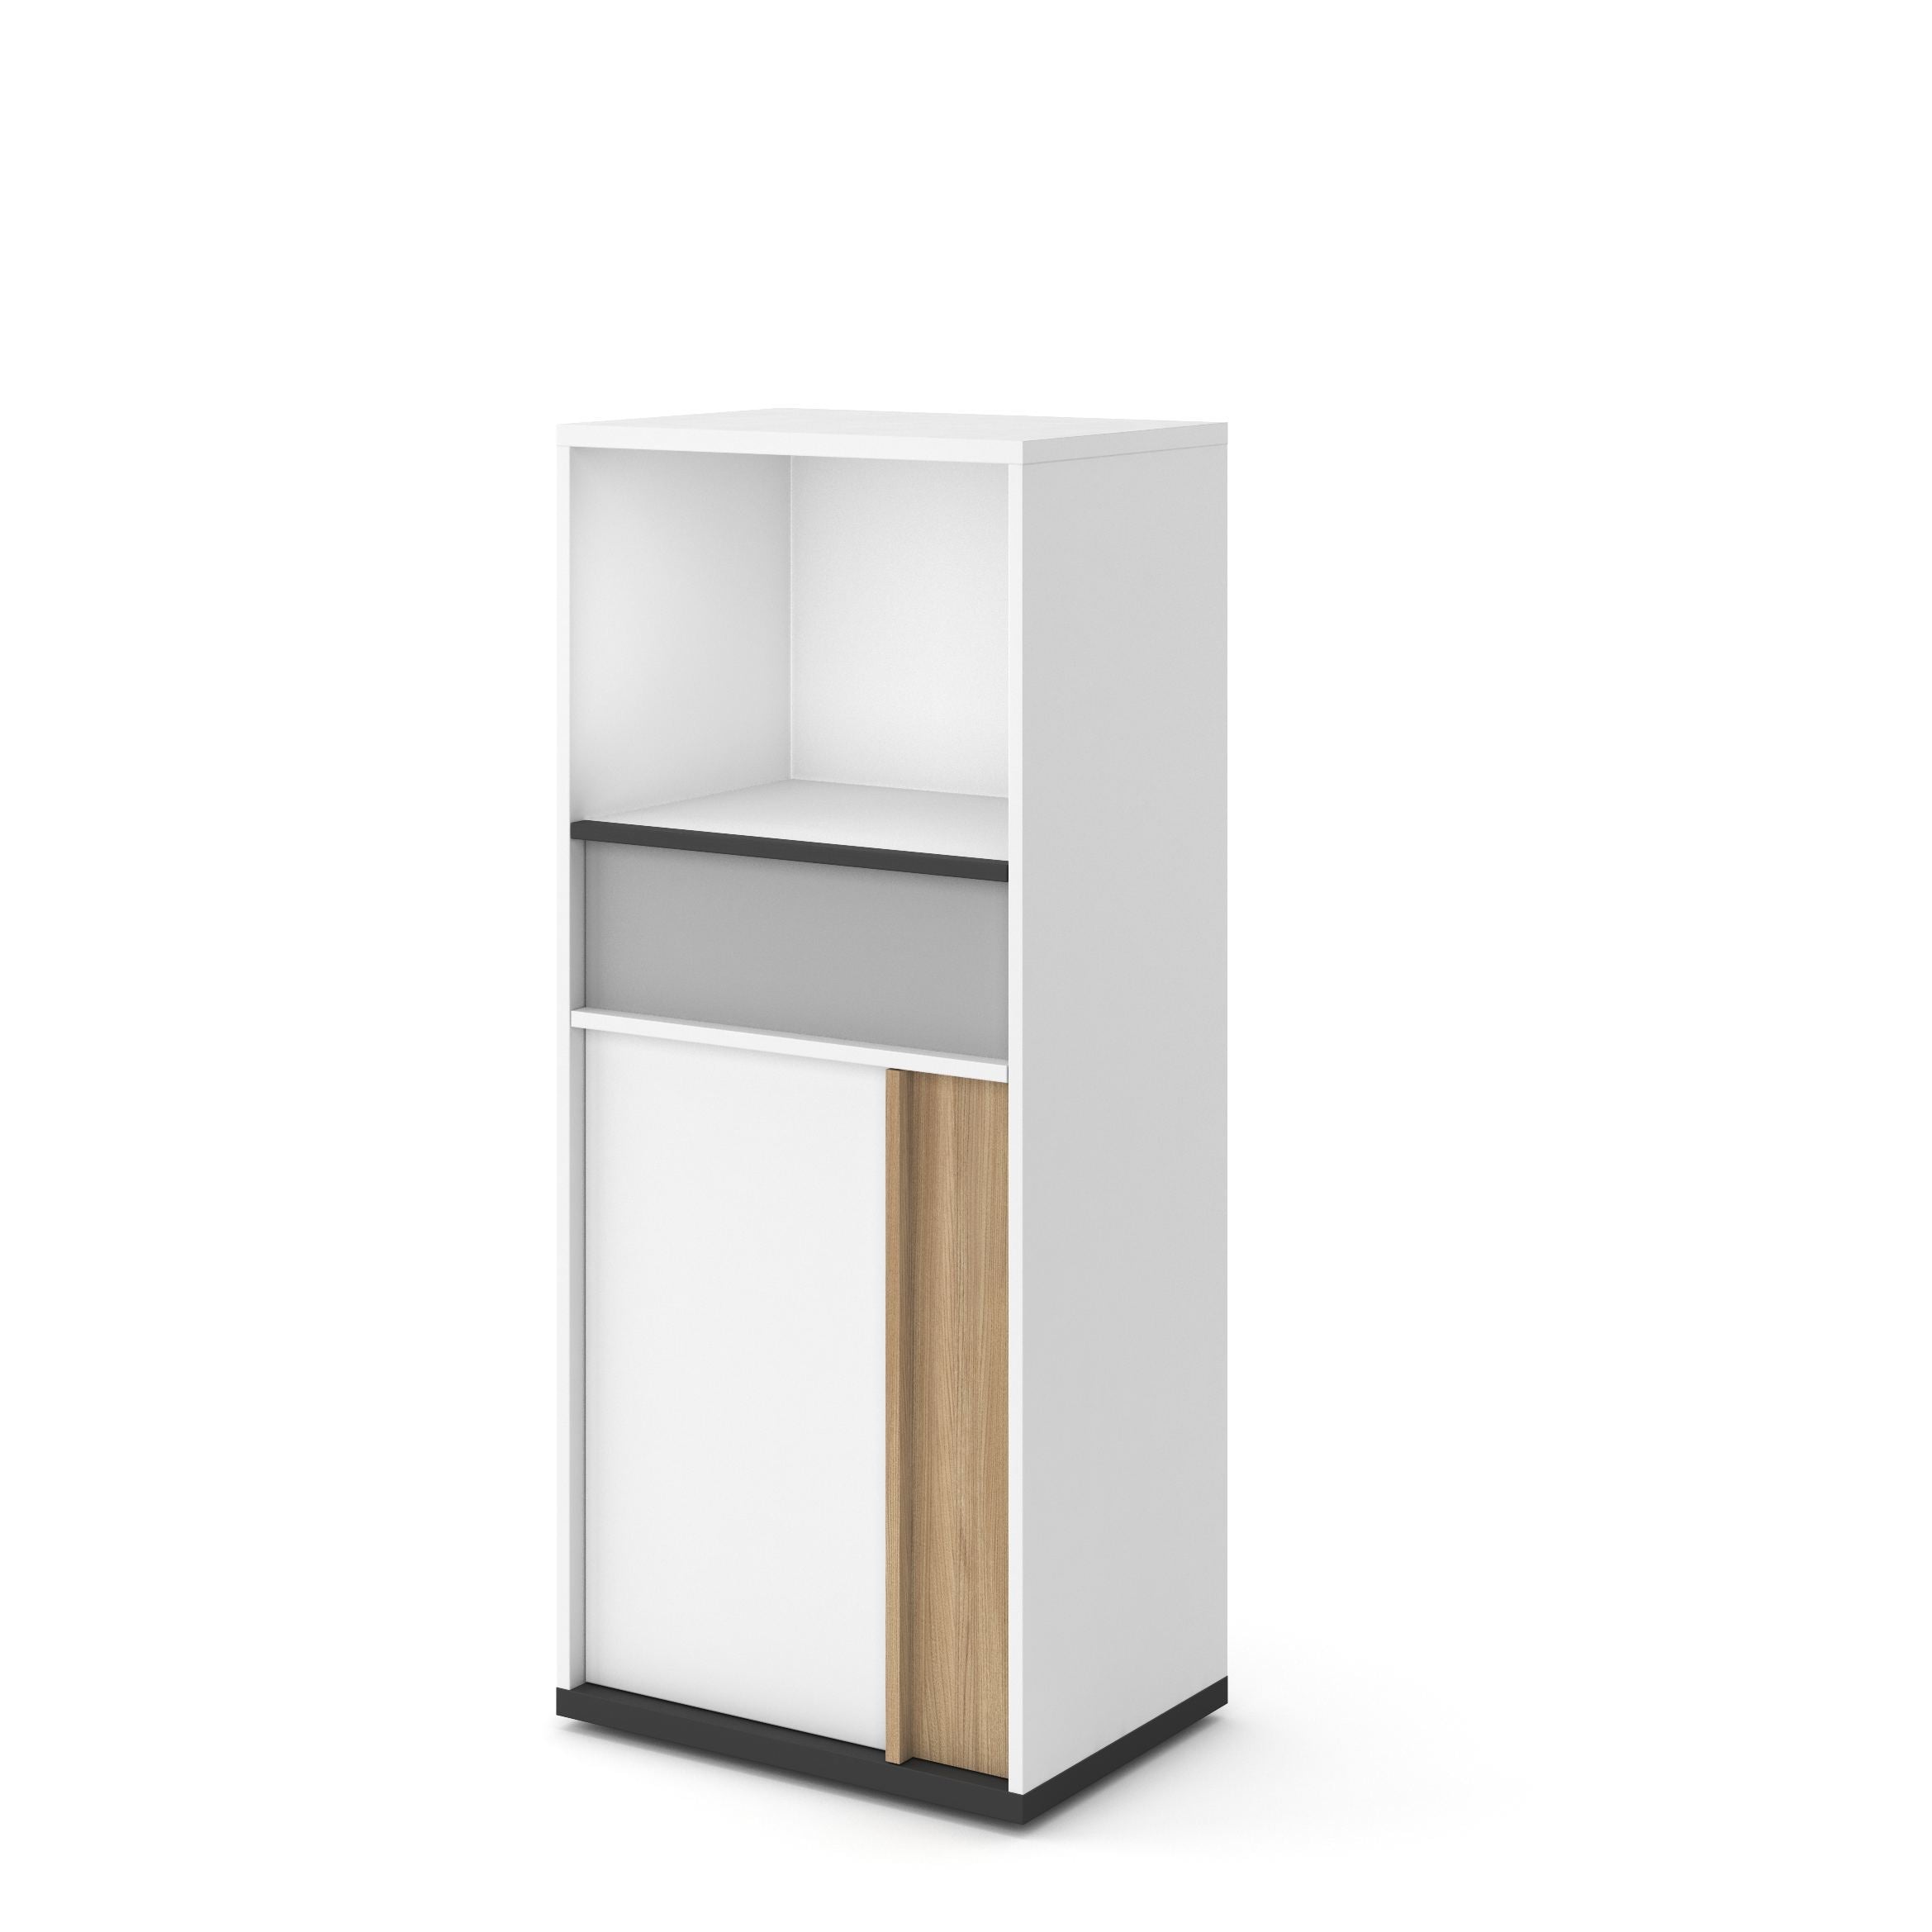 View Imola IM06 Sideboard Cabinet information